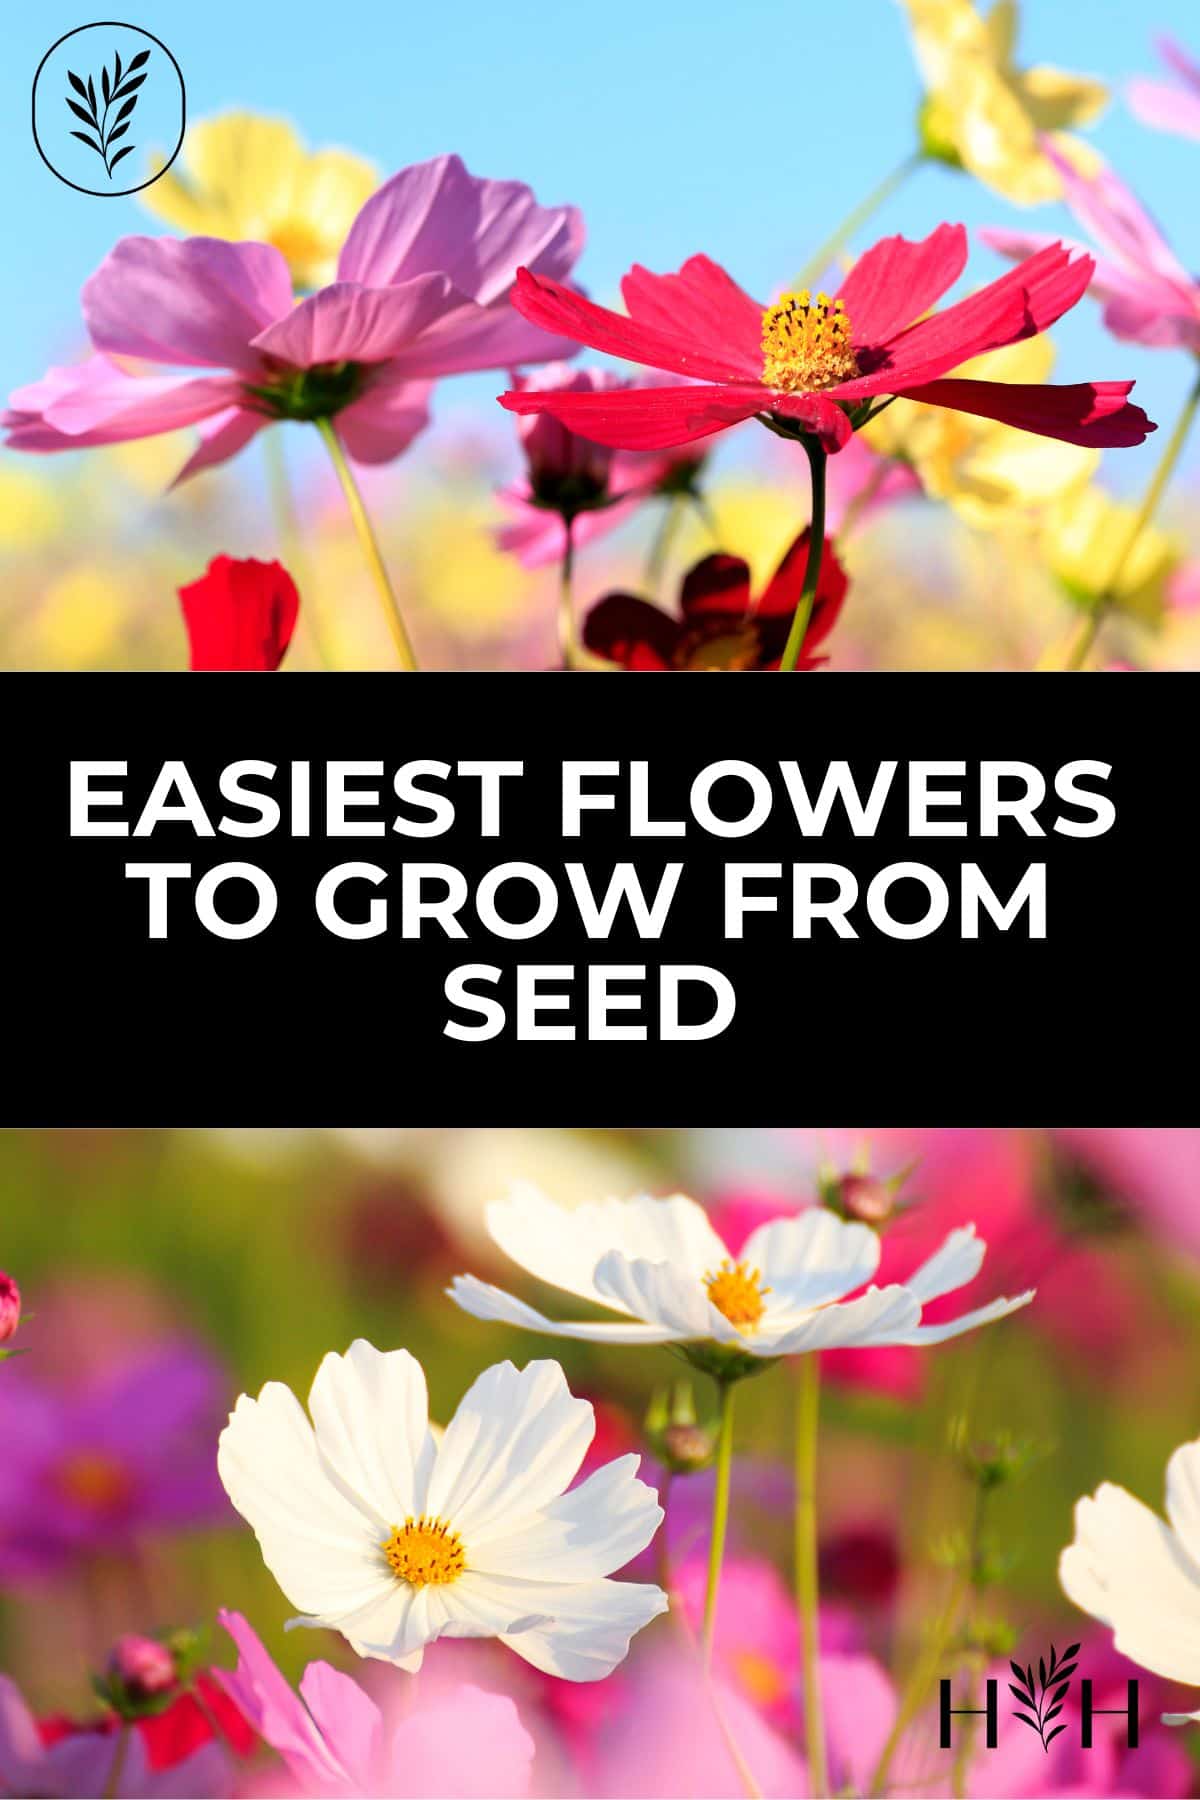 Easiest flowers to grow from seed via @home4theharvest